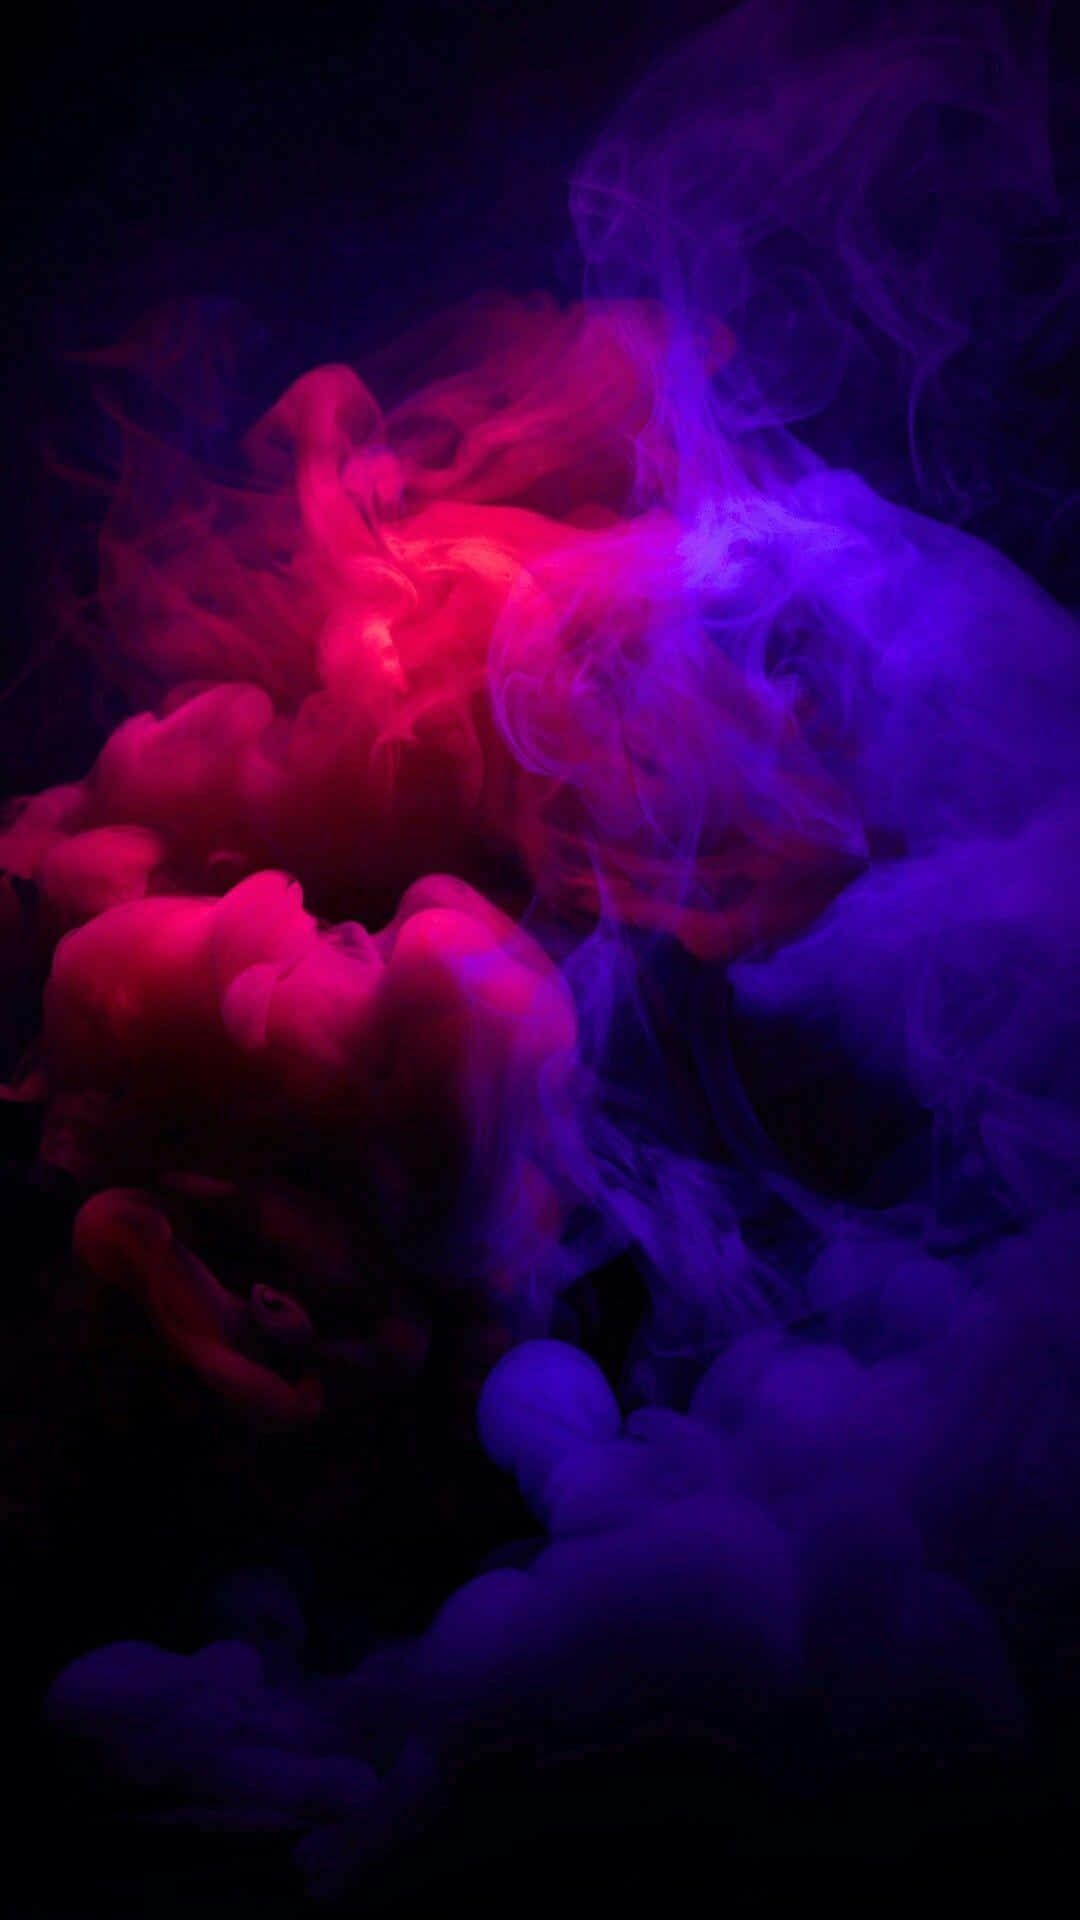 A Purple And Blue Smoke In The Dark Background